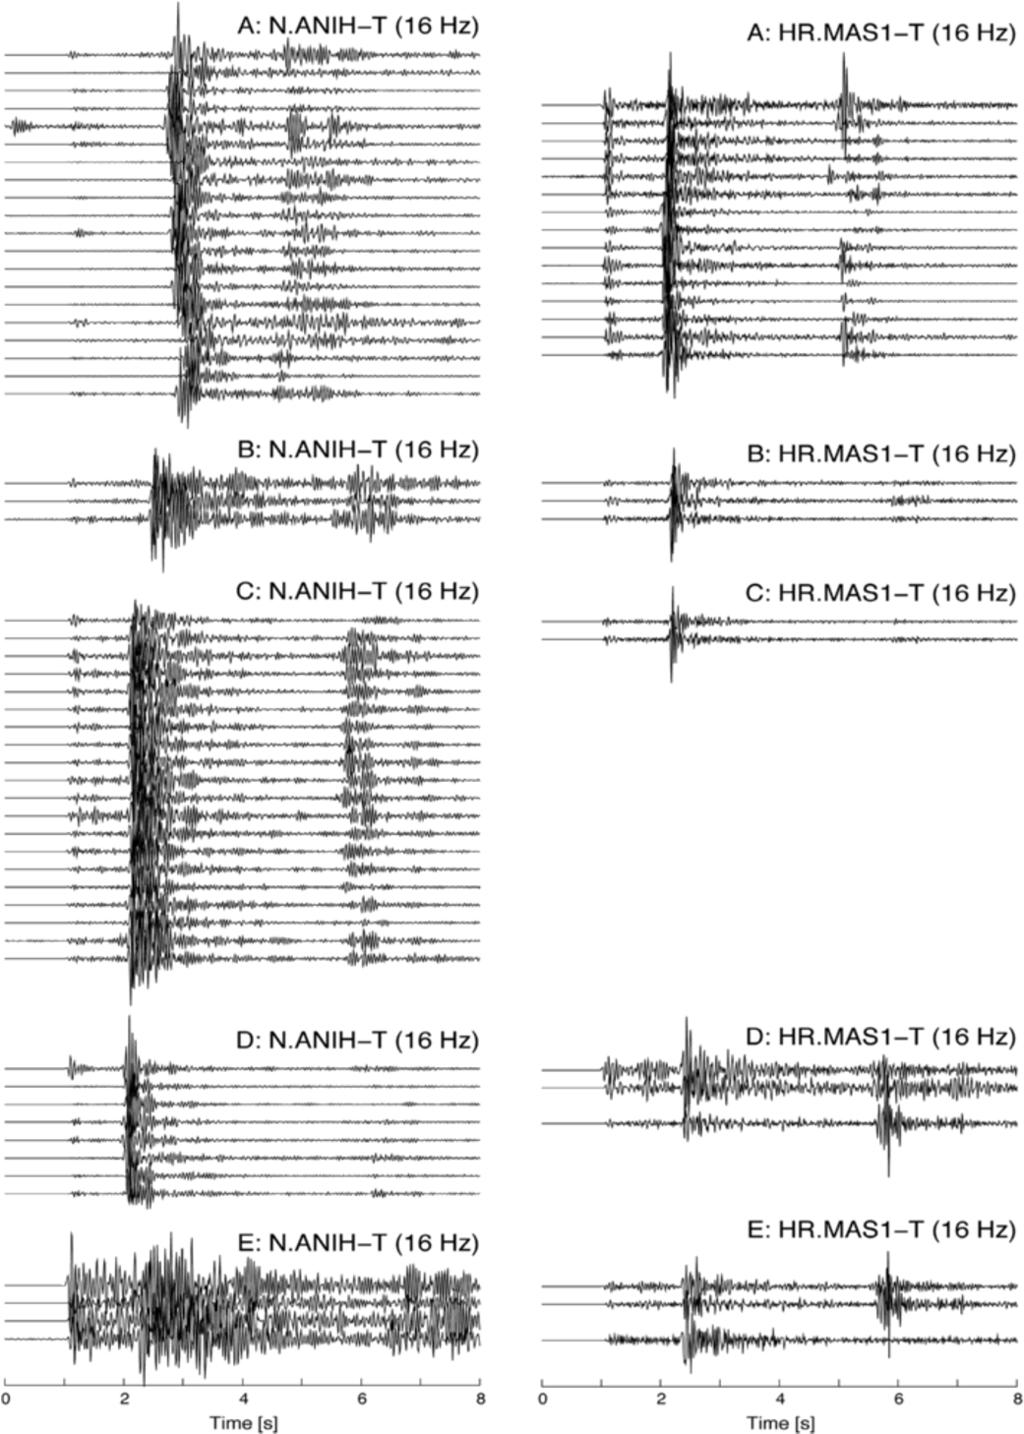 Kosuga Earth, Planets and Space 2014, 66:77 Page 11 of 16 Figure 10 Tangential component seismograms from two stations for the five earthquake clusters (A to E).